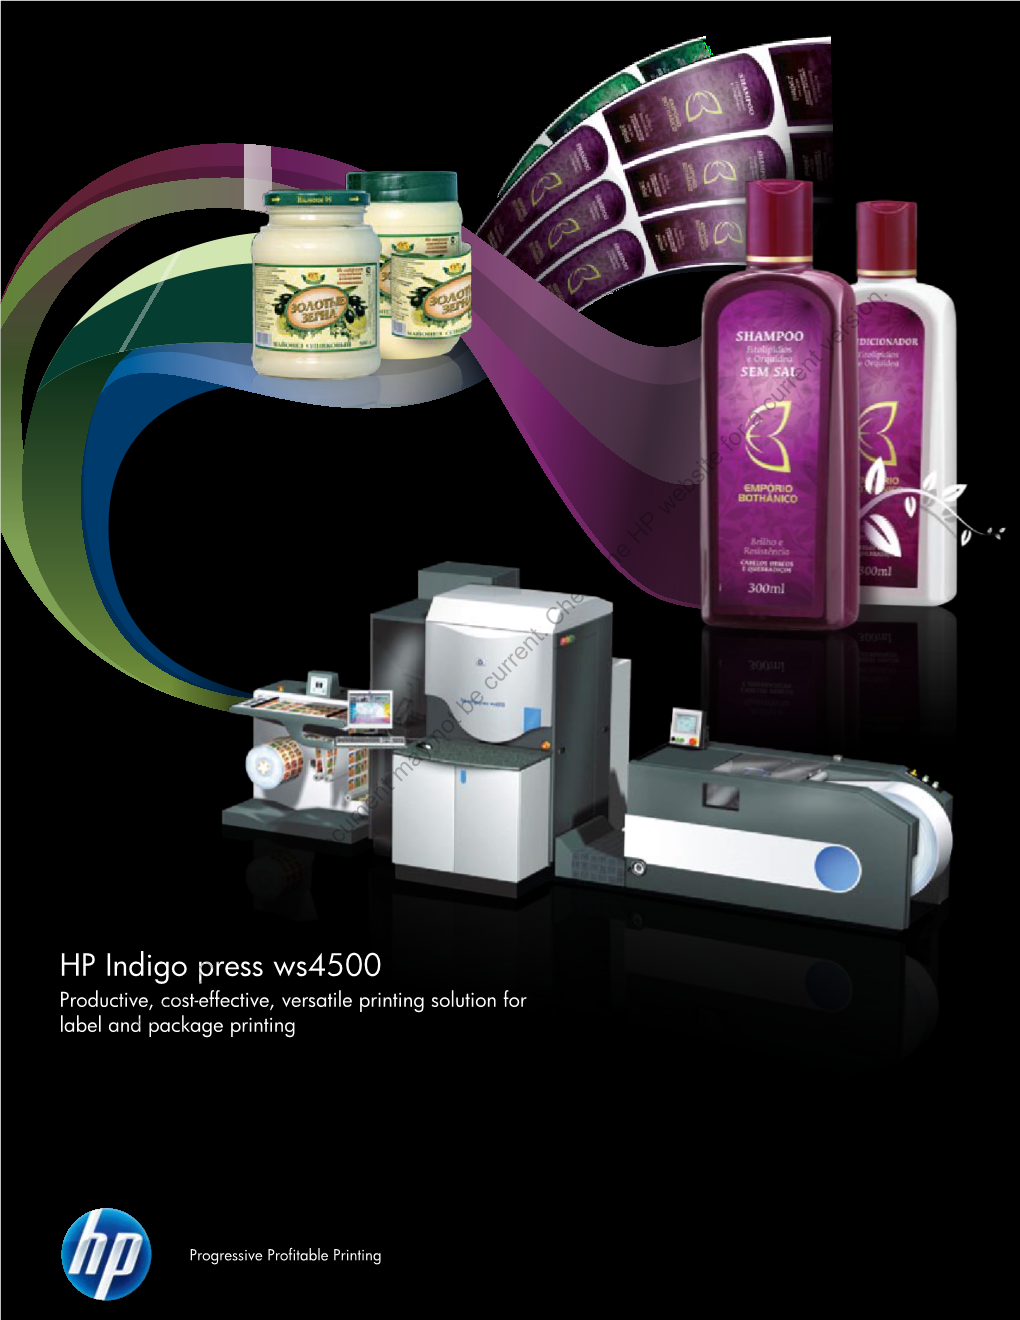 HP Indigo Press Ws4500 Productive, Cost-Effective,Information Versatile Printing Solution for Label and Thepackage Printing